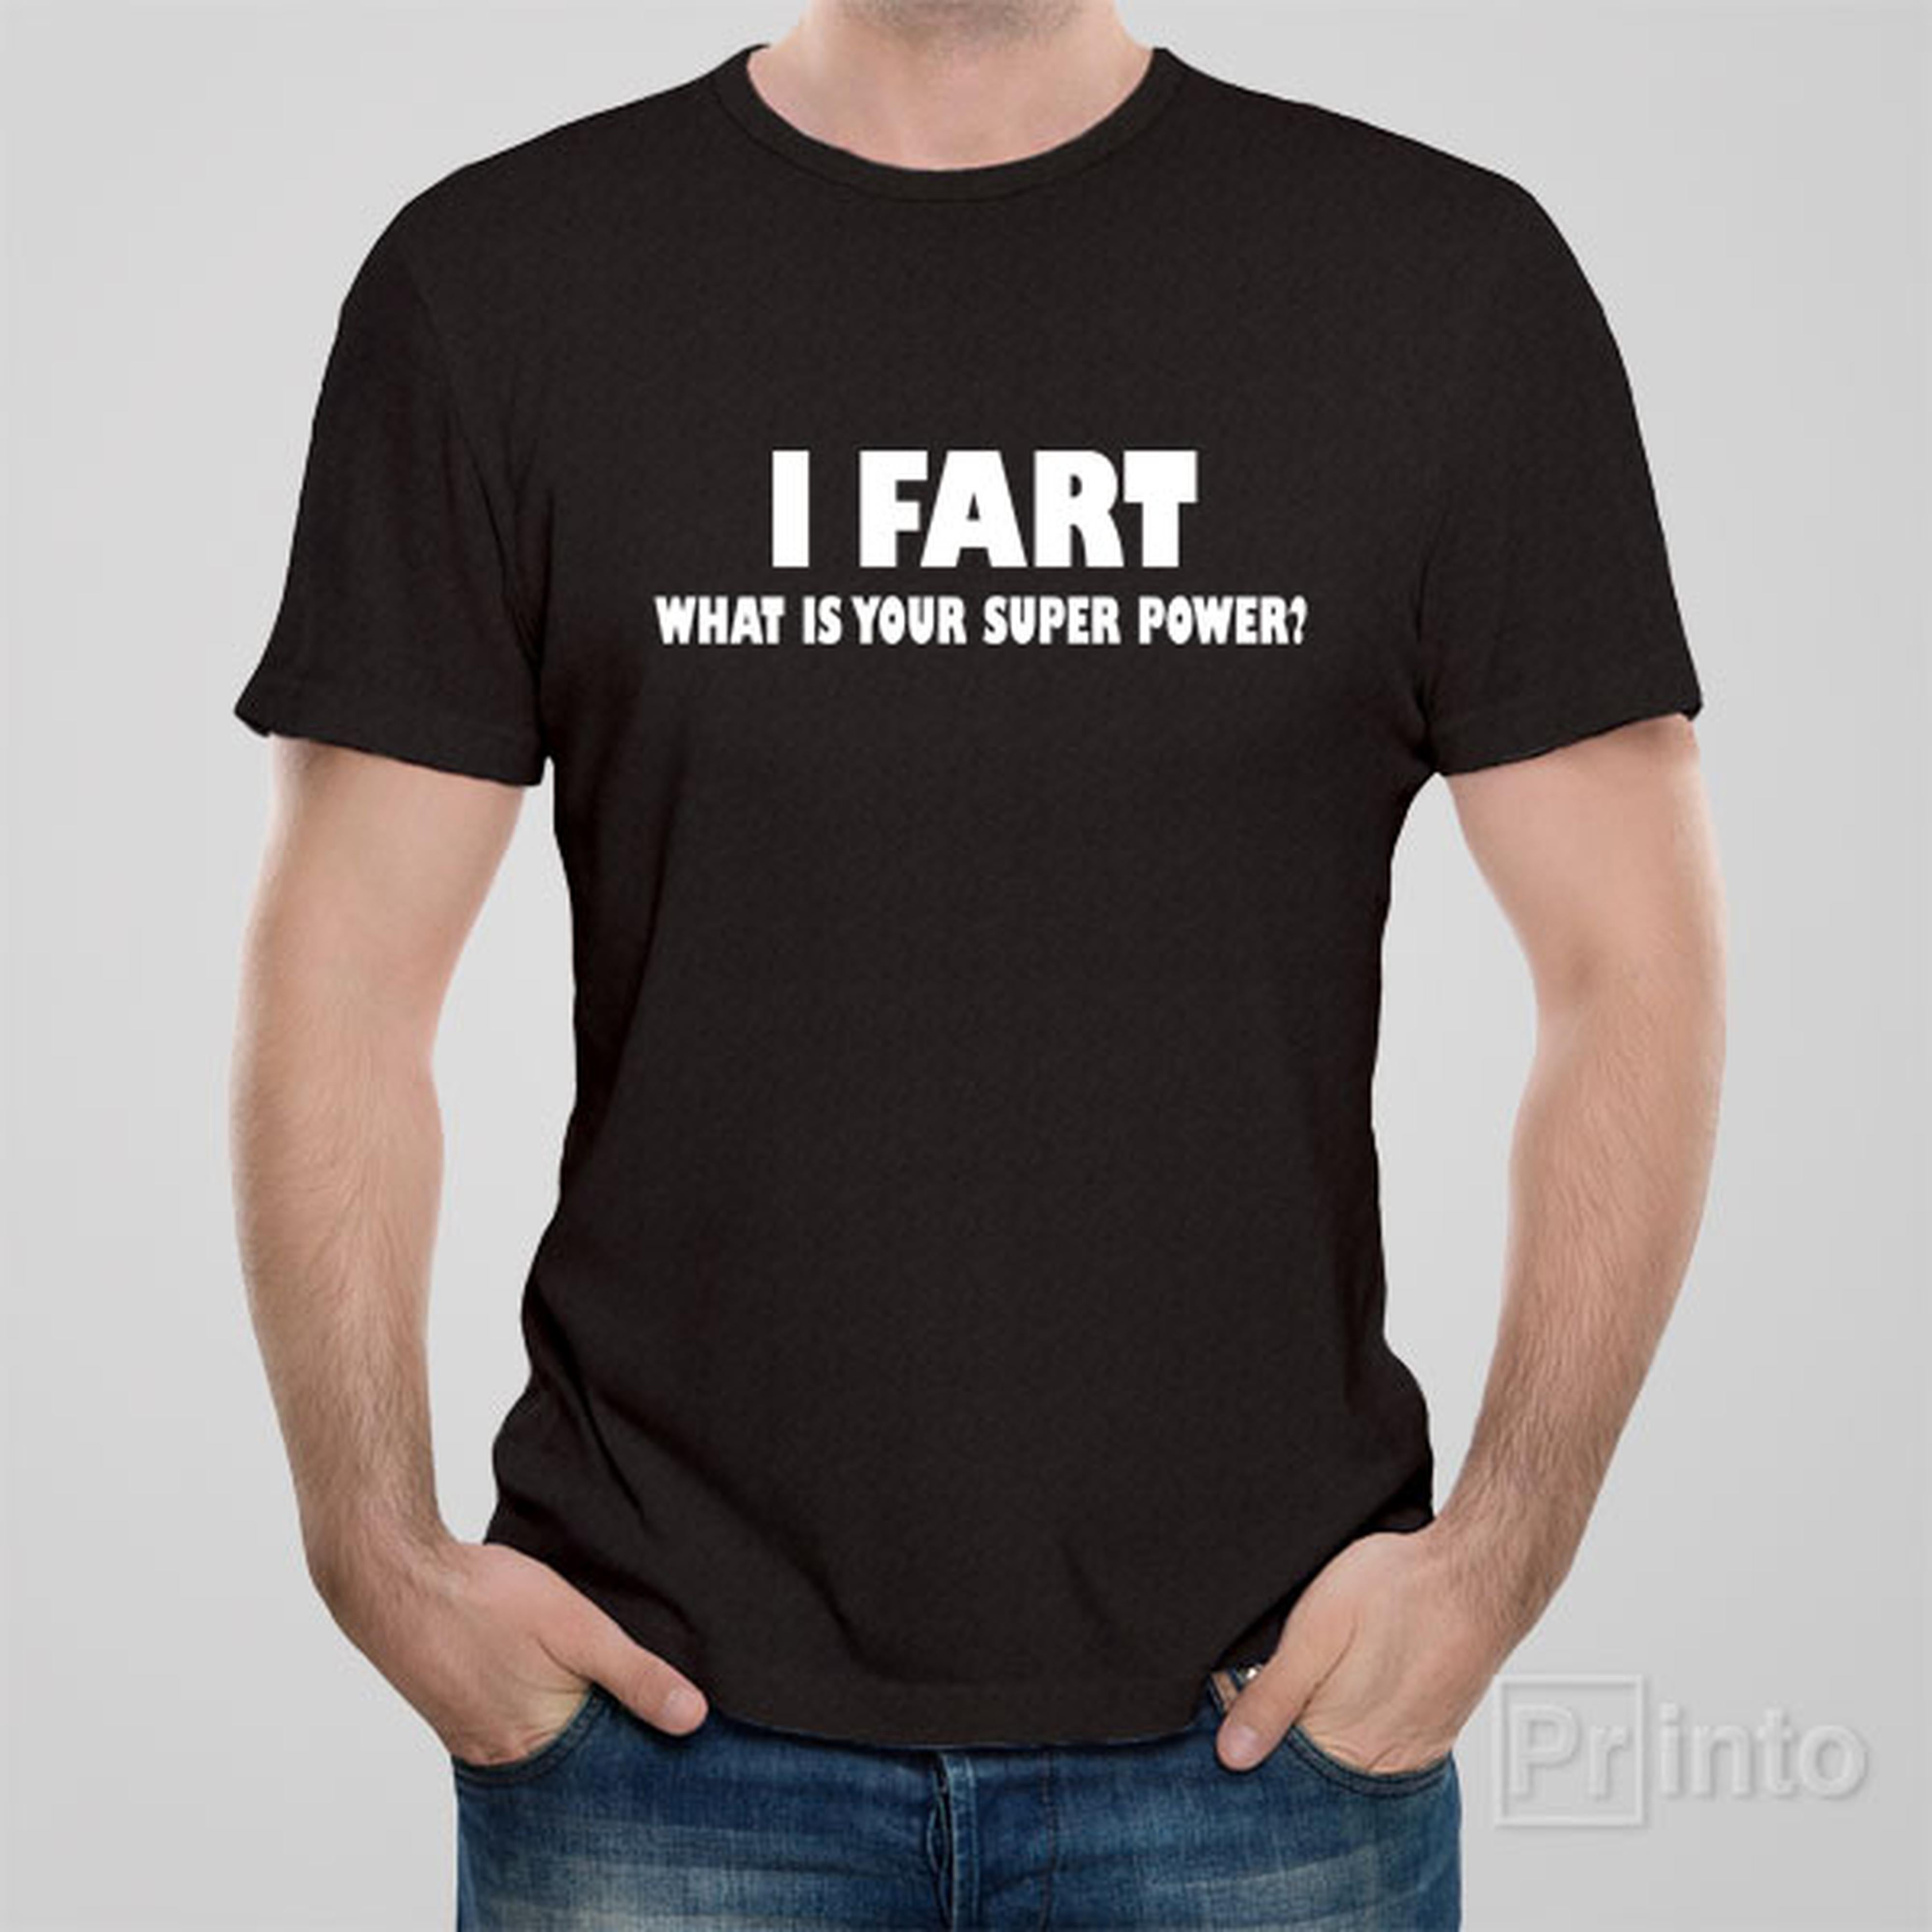 i-fart-what-is-your-superpower-t-shirt